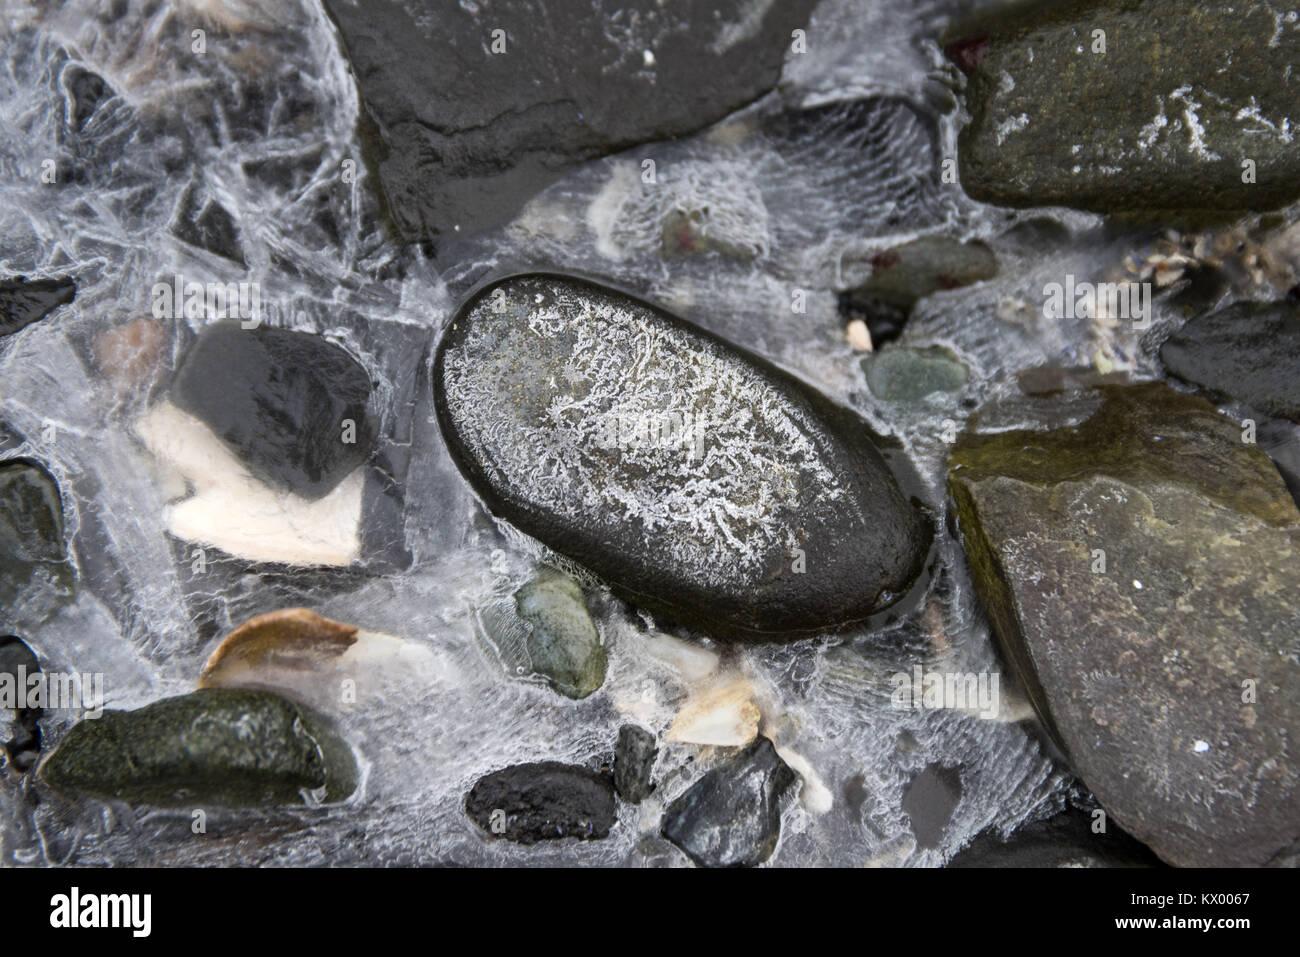 Patterns formed by salt precipitating from seawater as it freezes, Acadia National Park, Maine. Stock Photo